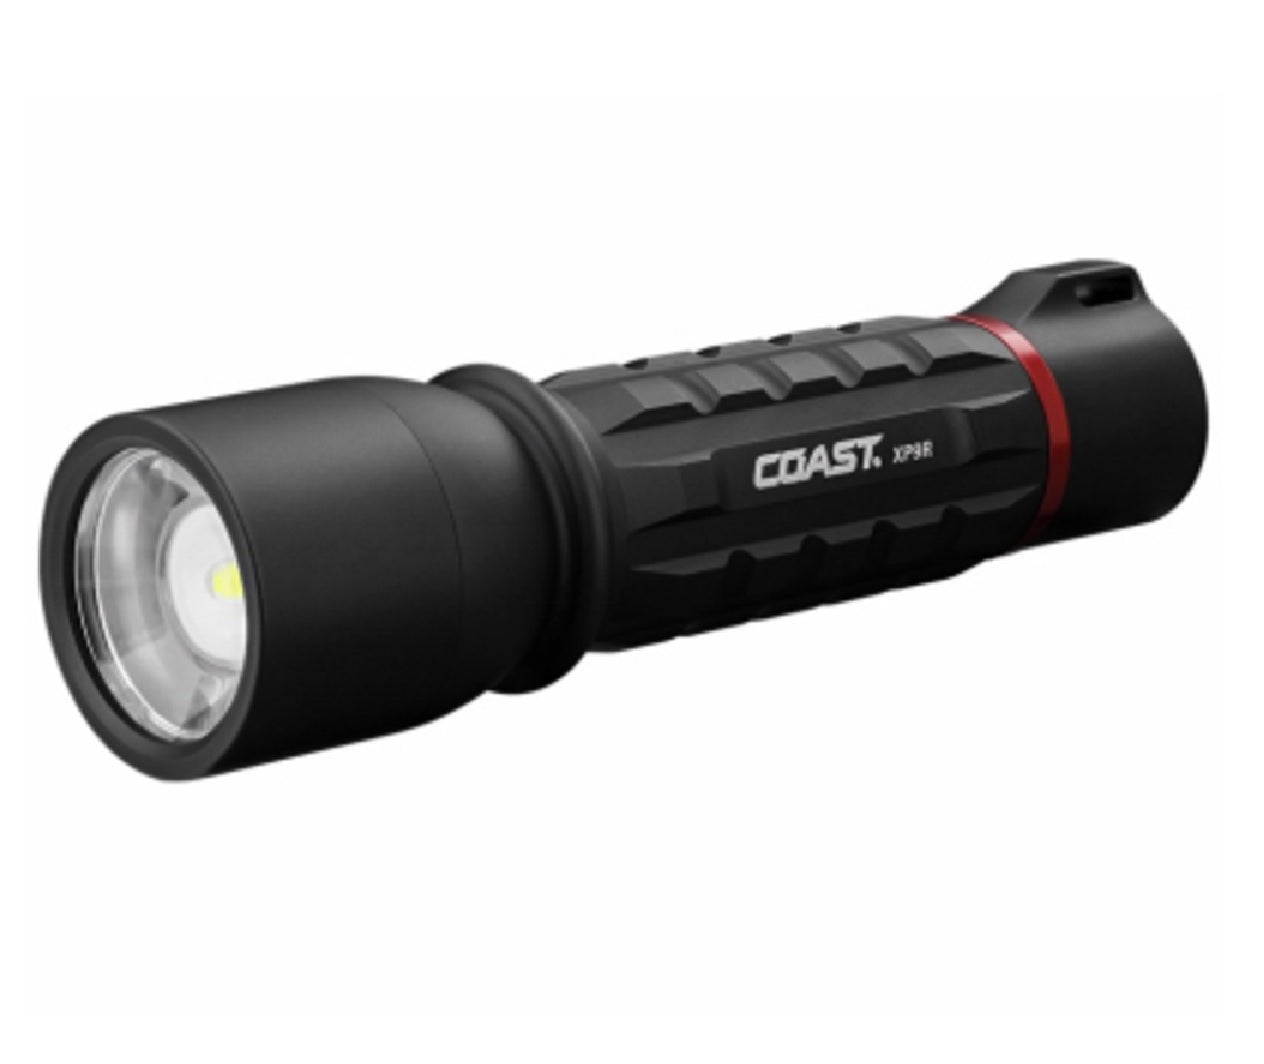 LED LENSER i7r Rechargeable Flashlight Torch 220 lumens NEW industrial genuine 